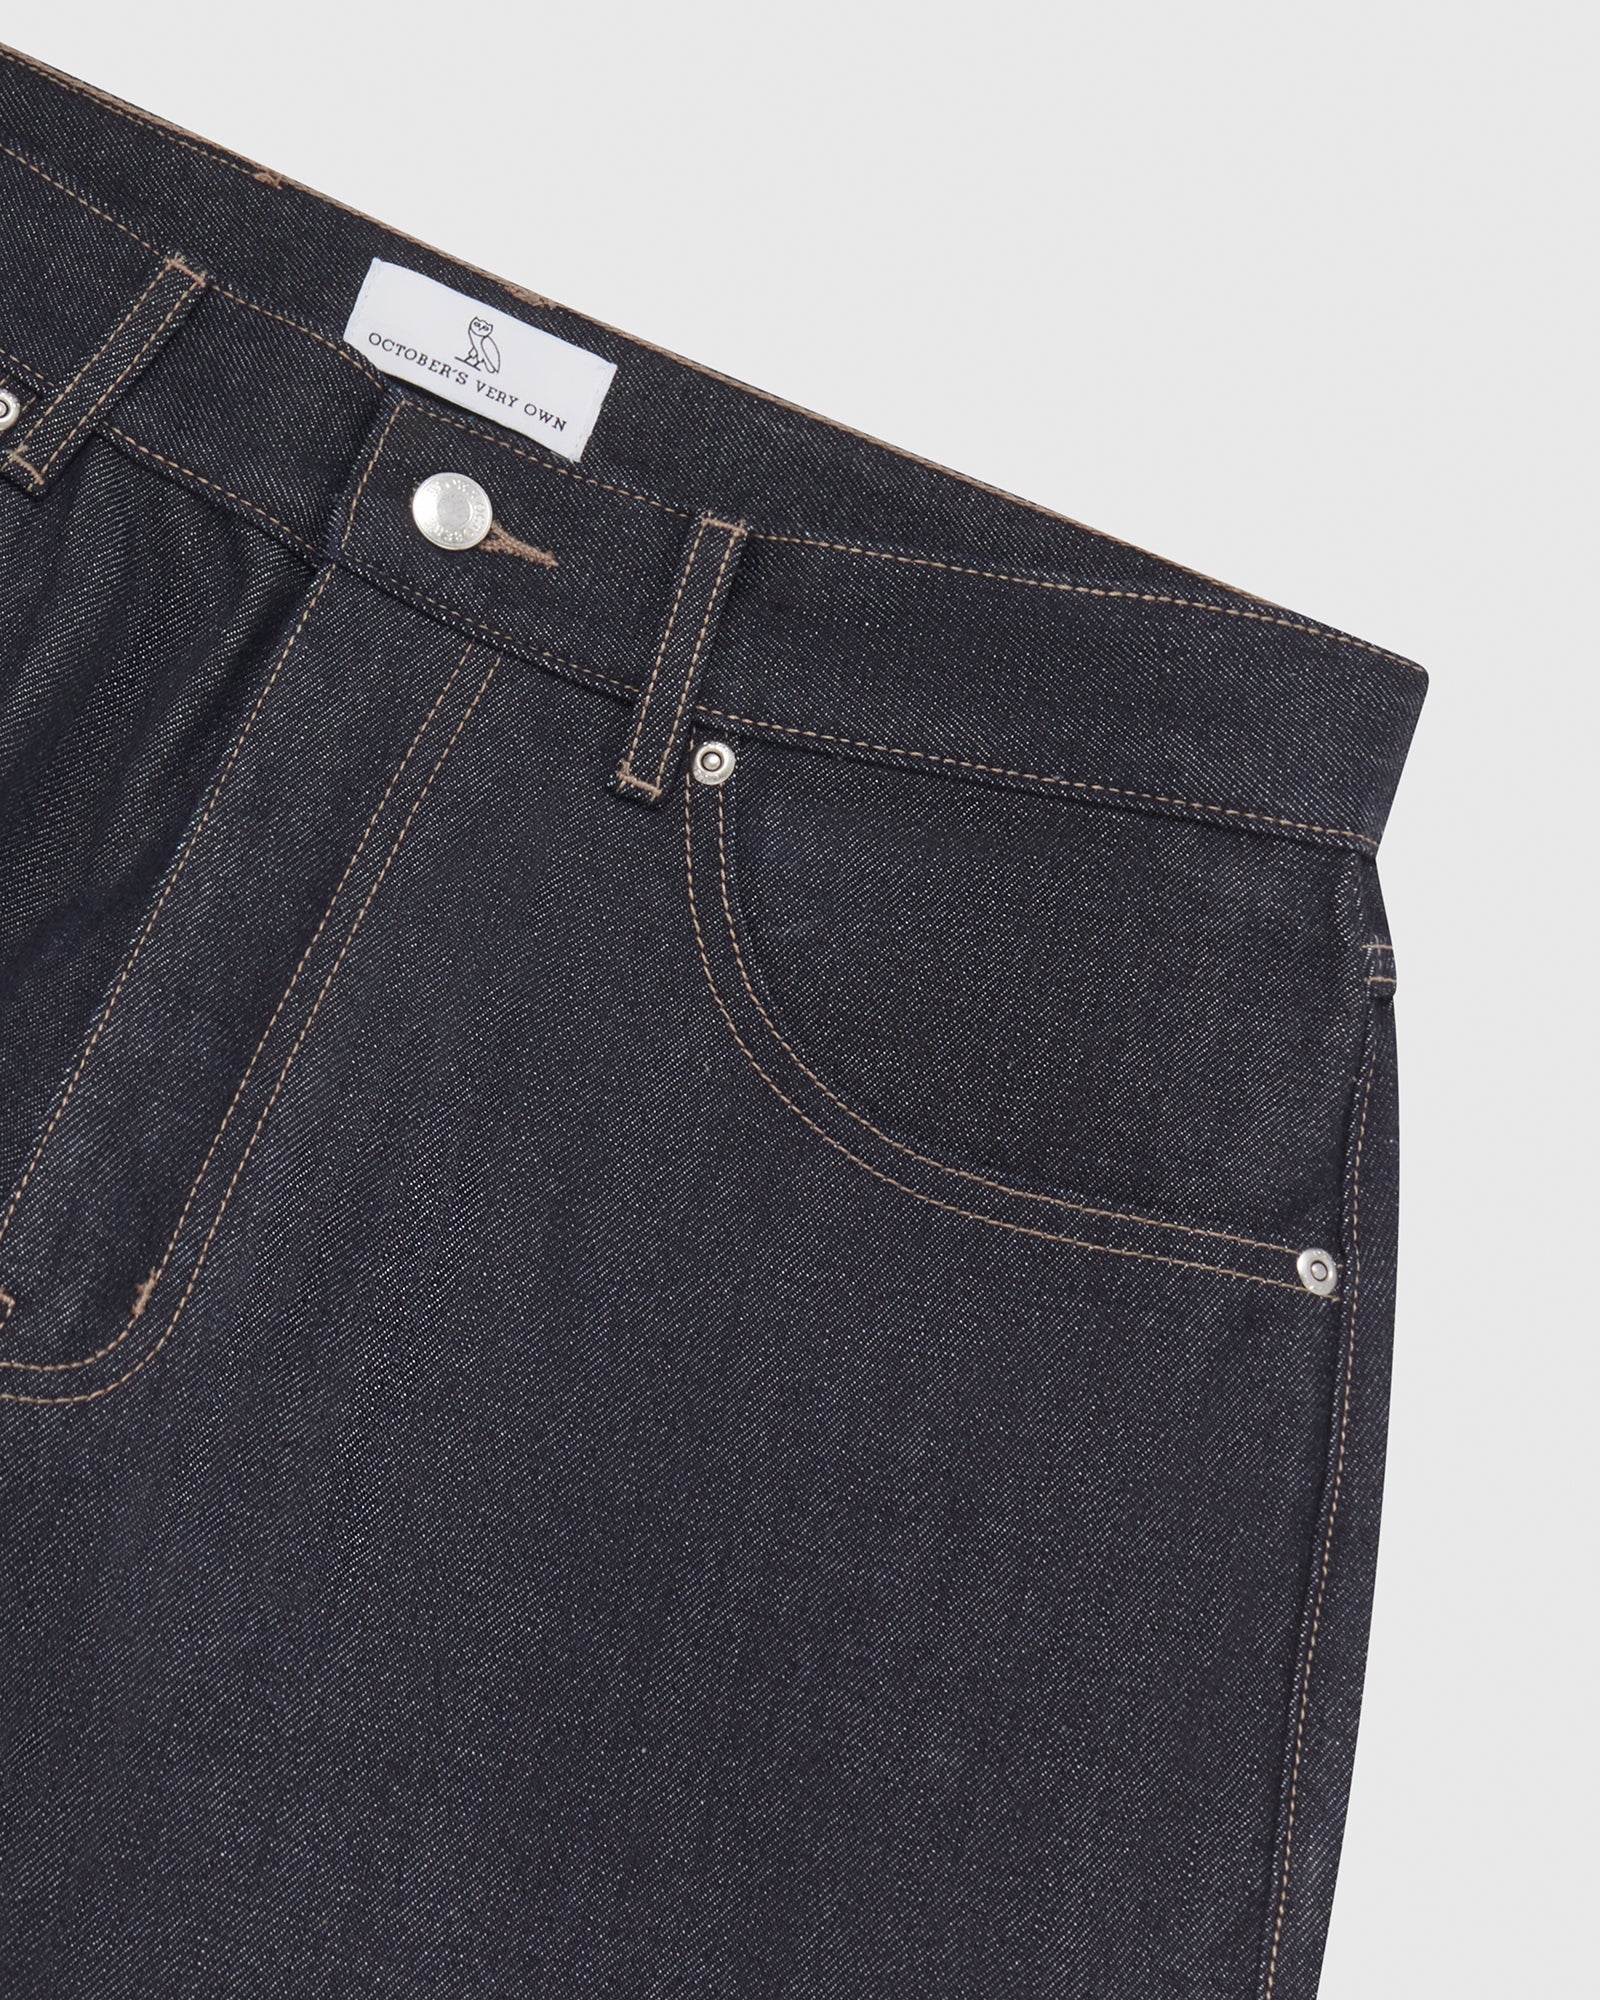 5 Pocket Relaxed Fit Jean - Raw Indigo